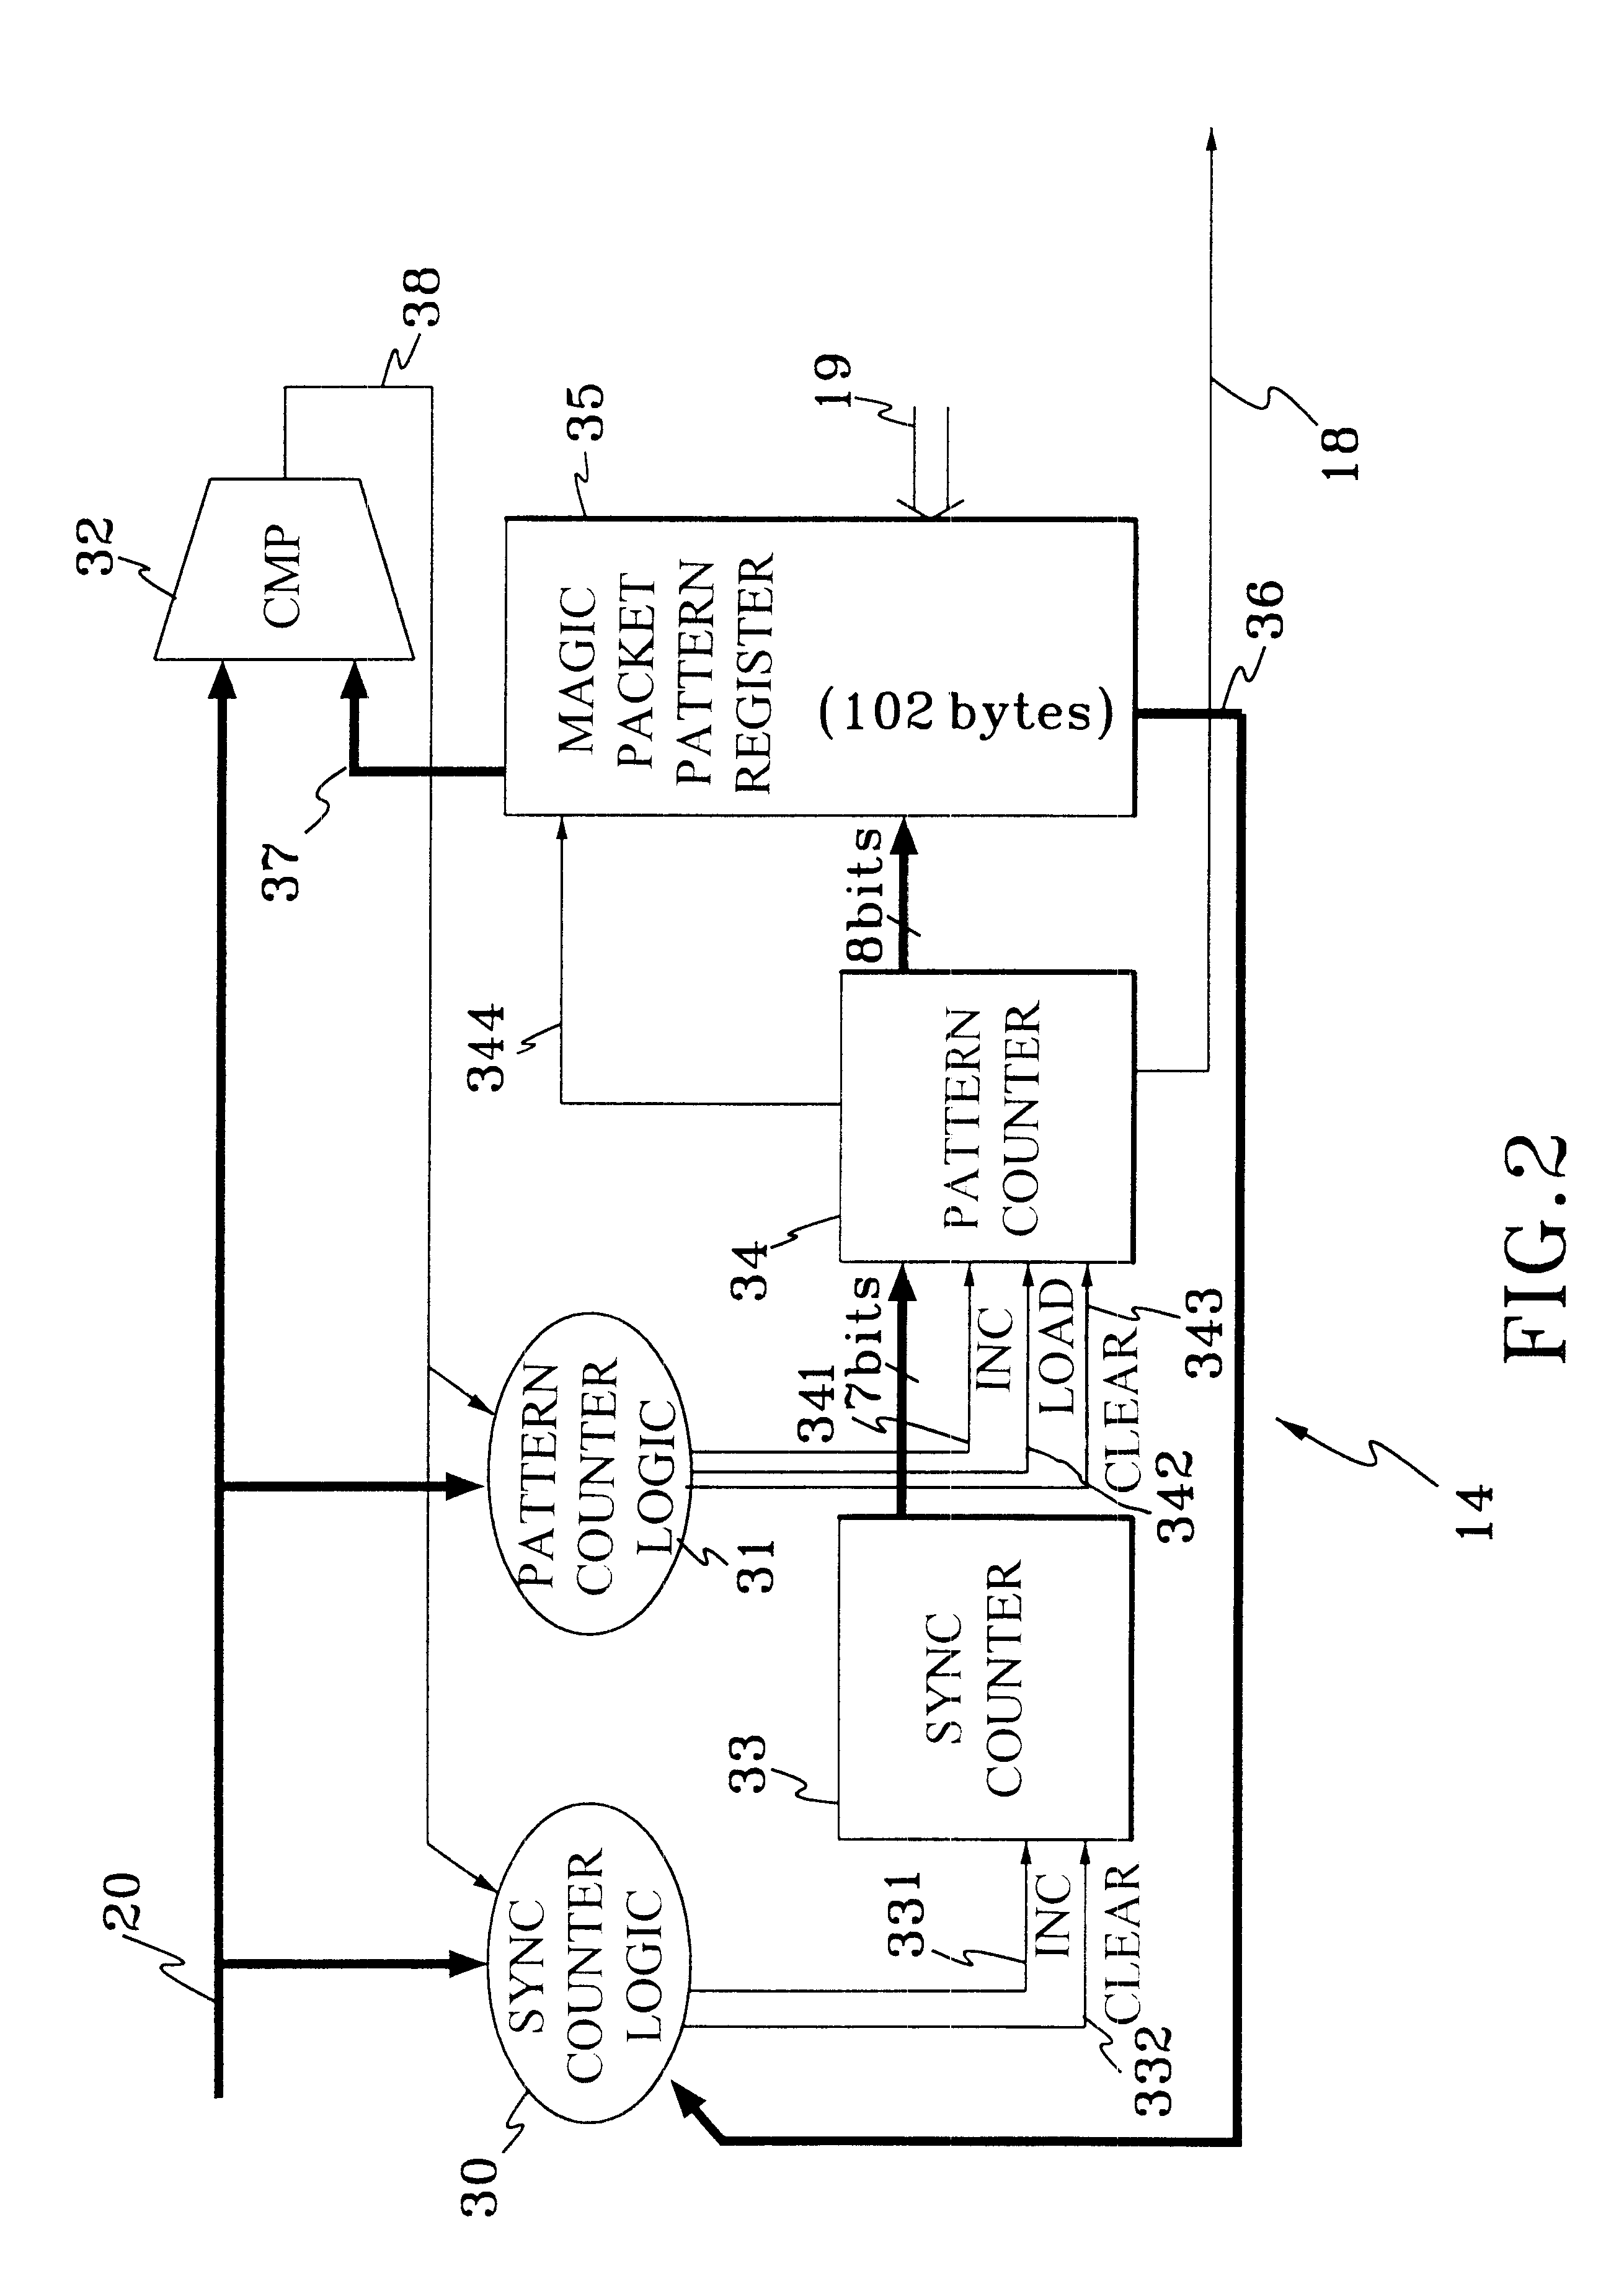 Method and apparatus for detecting data streams with specific pattern